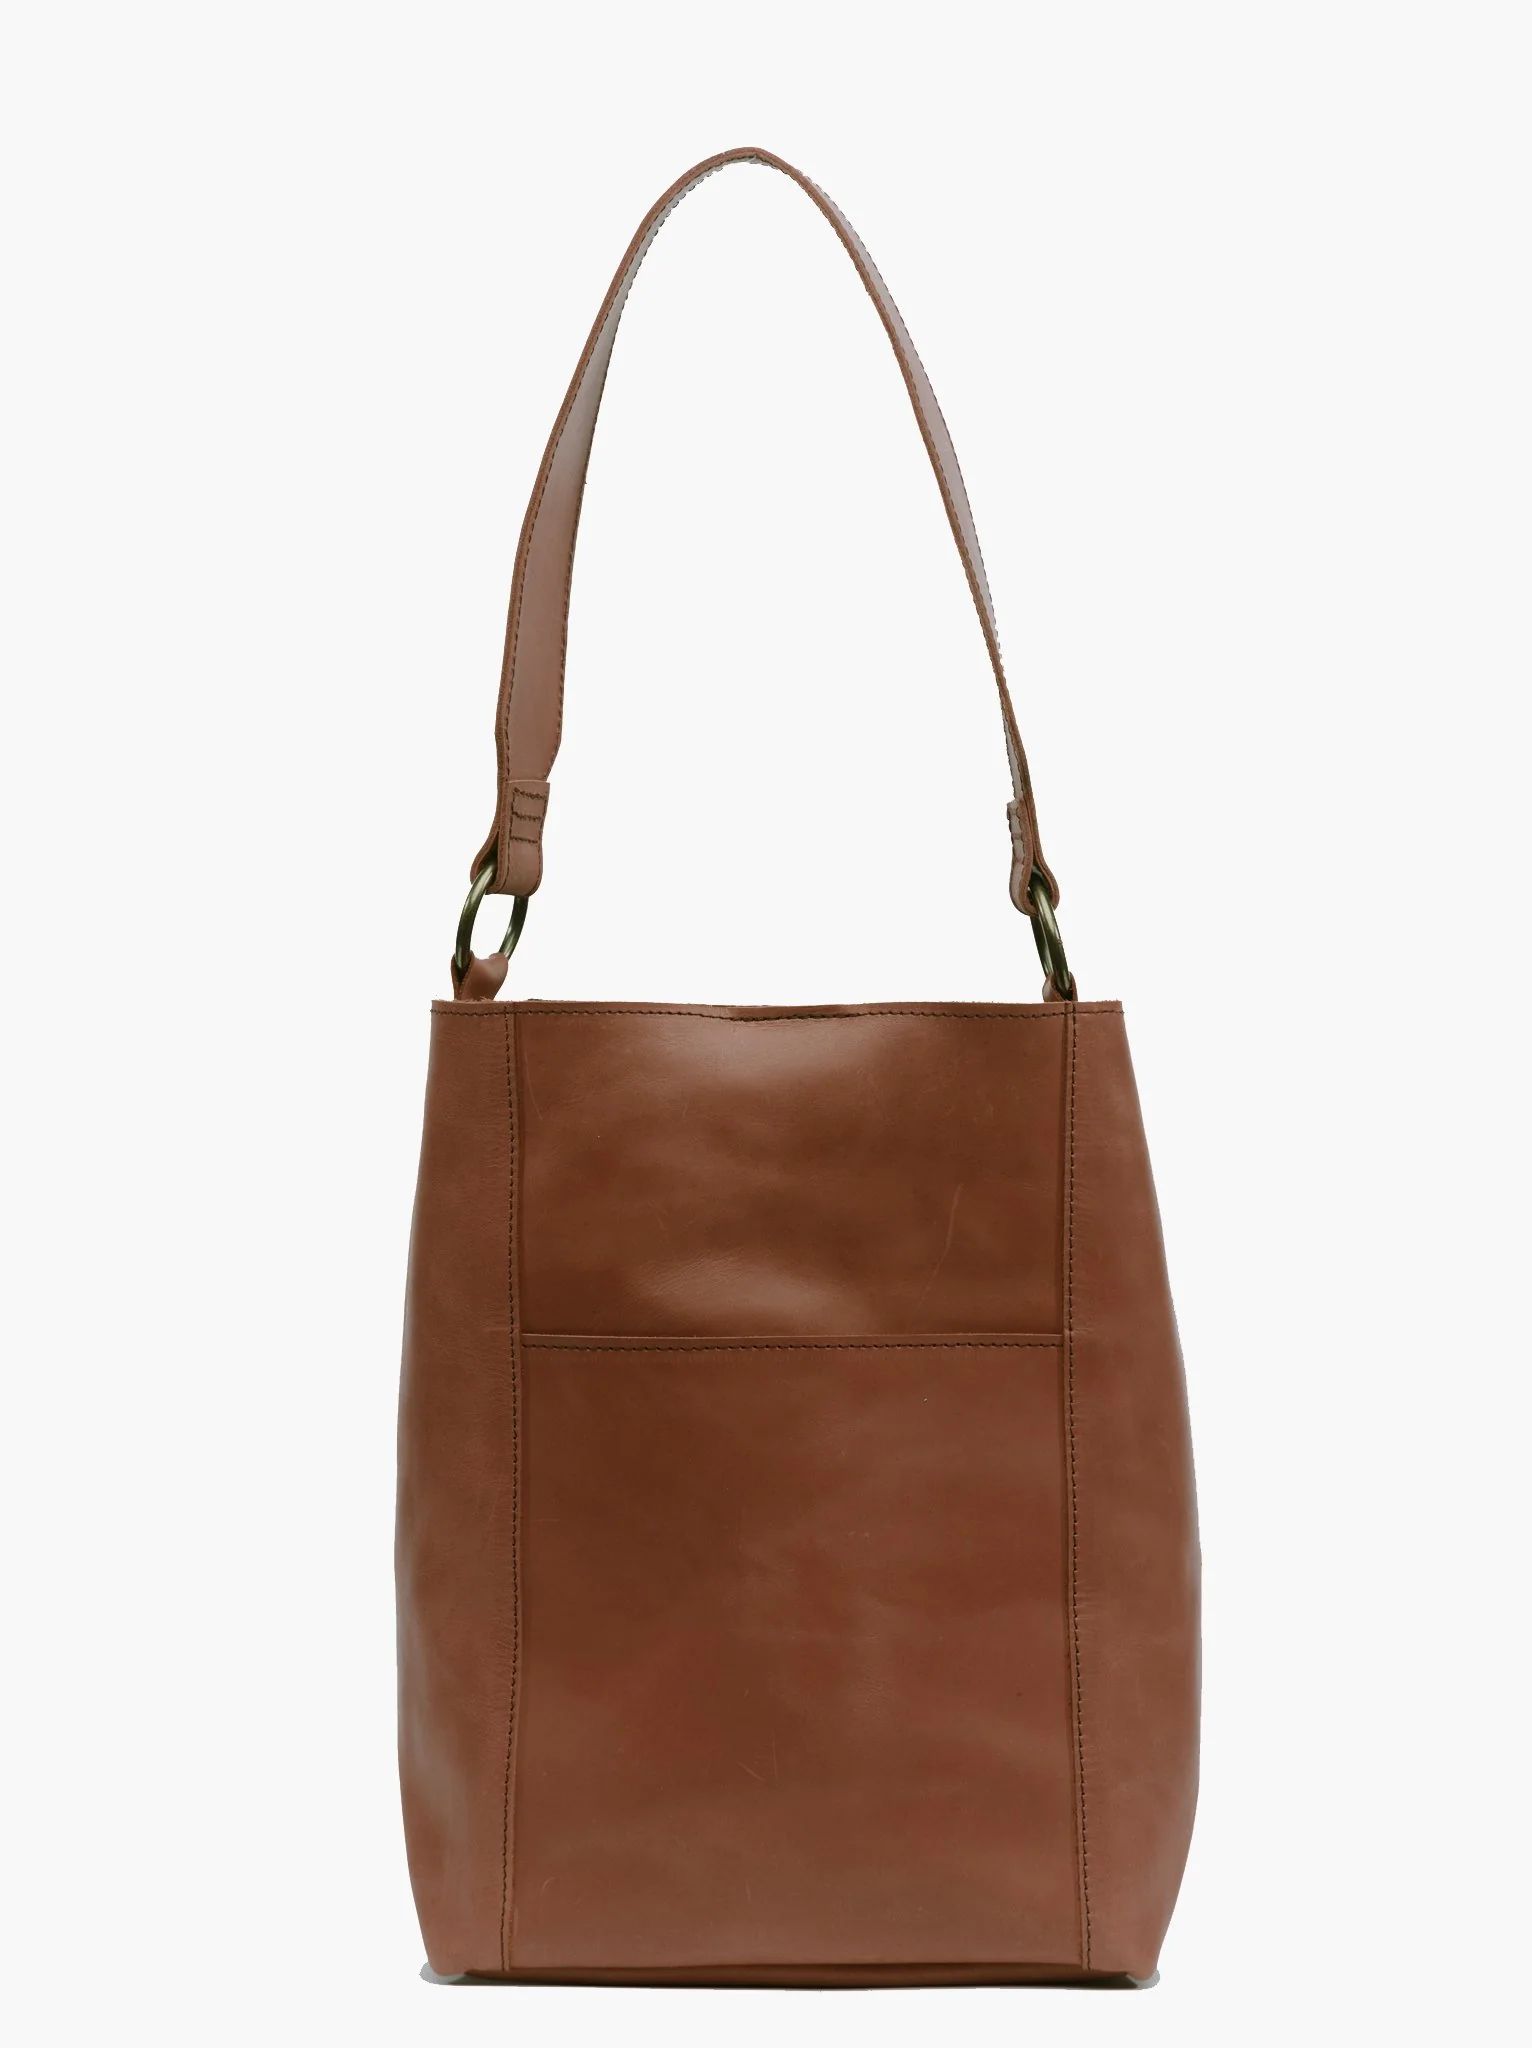 Mihiret Bucket Bag | ABLE